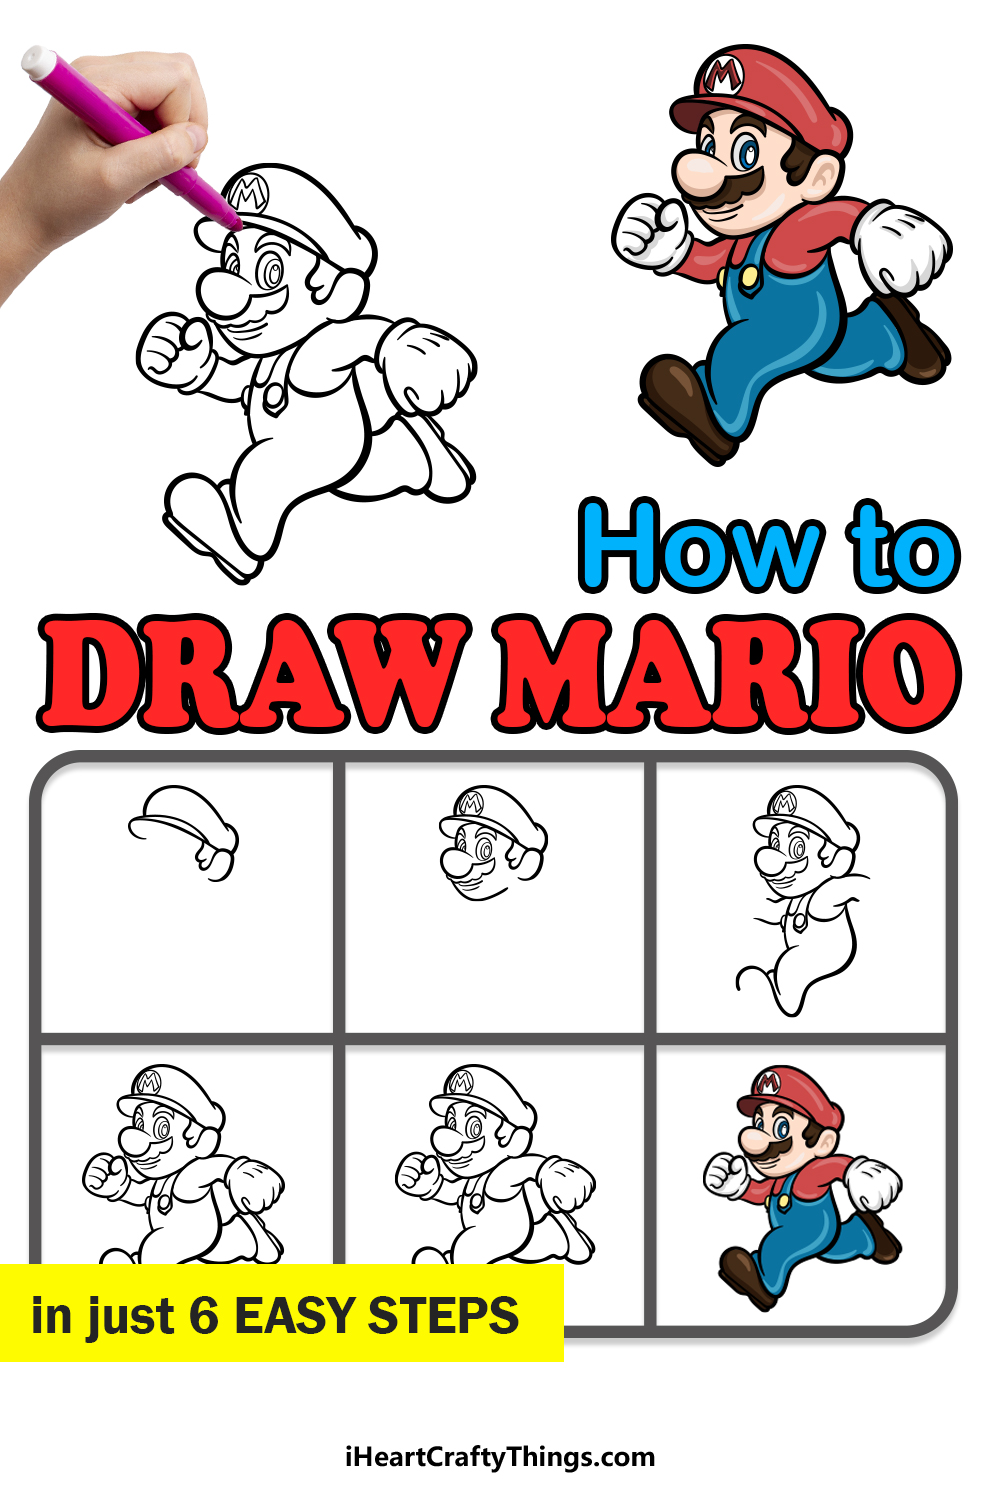 how to draw Mario in 6 easy steps